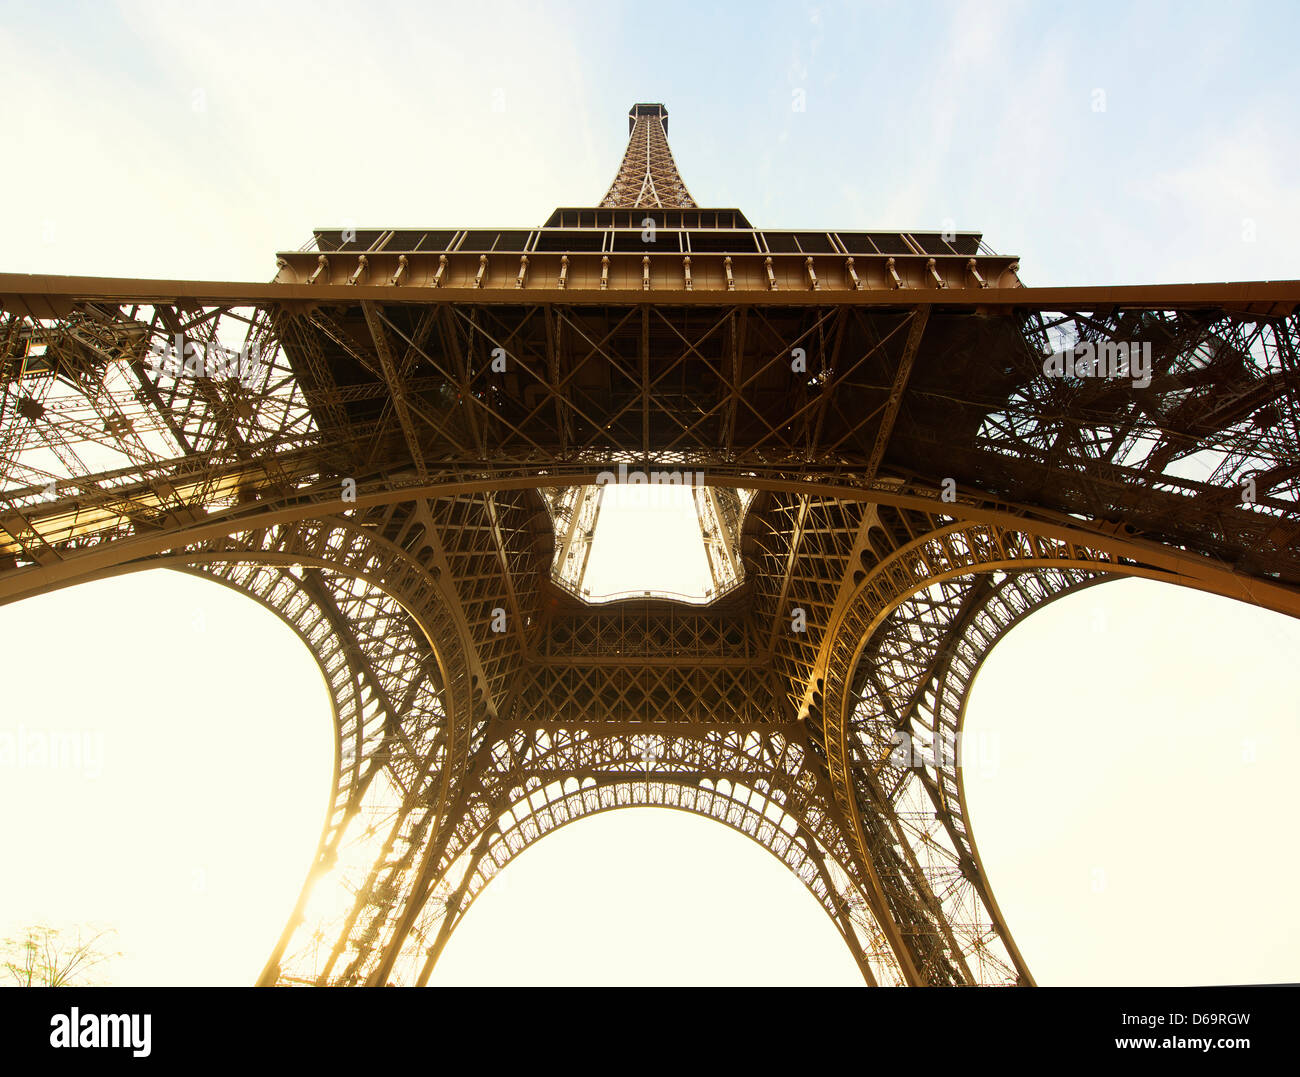 Low angle view of Eiffel Tower, Paris, France Stock Photo